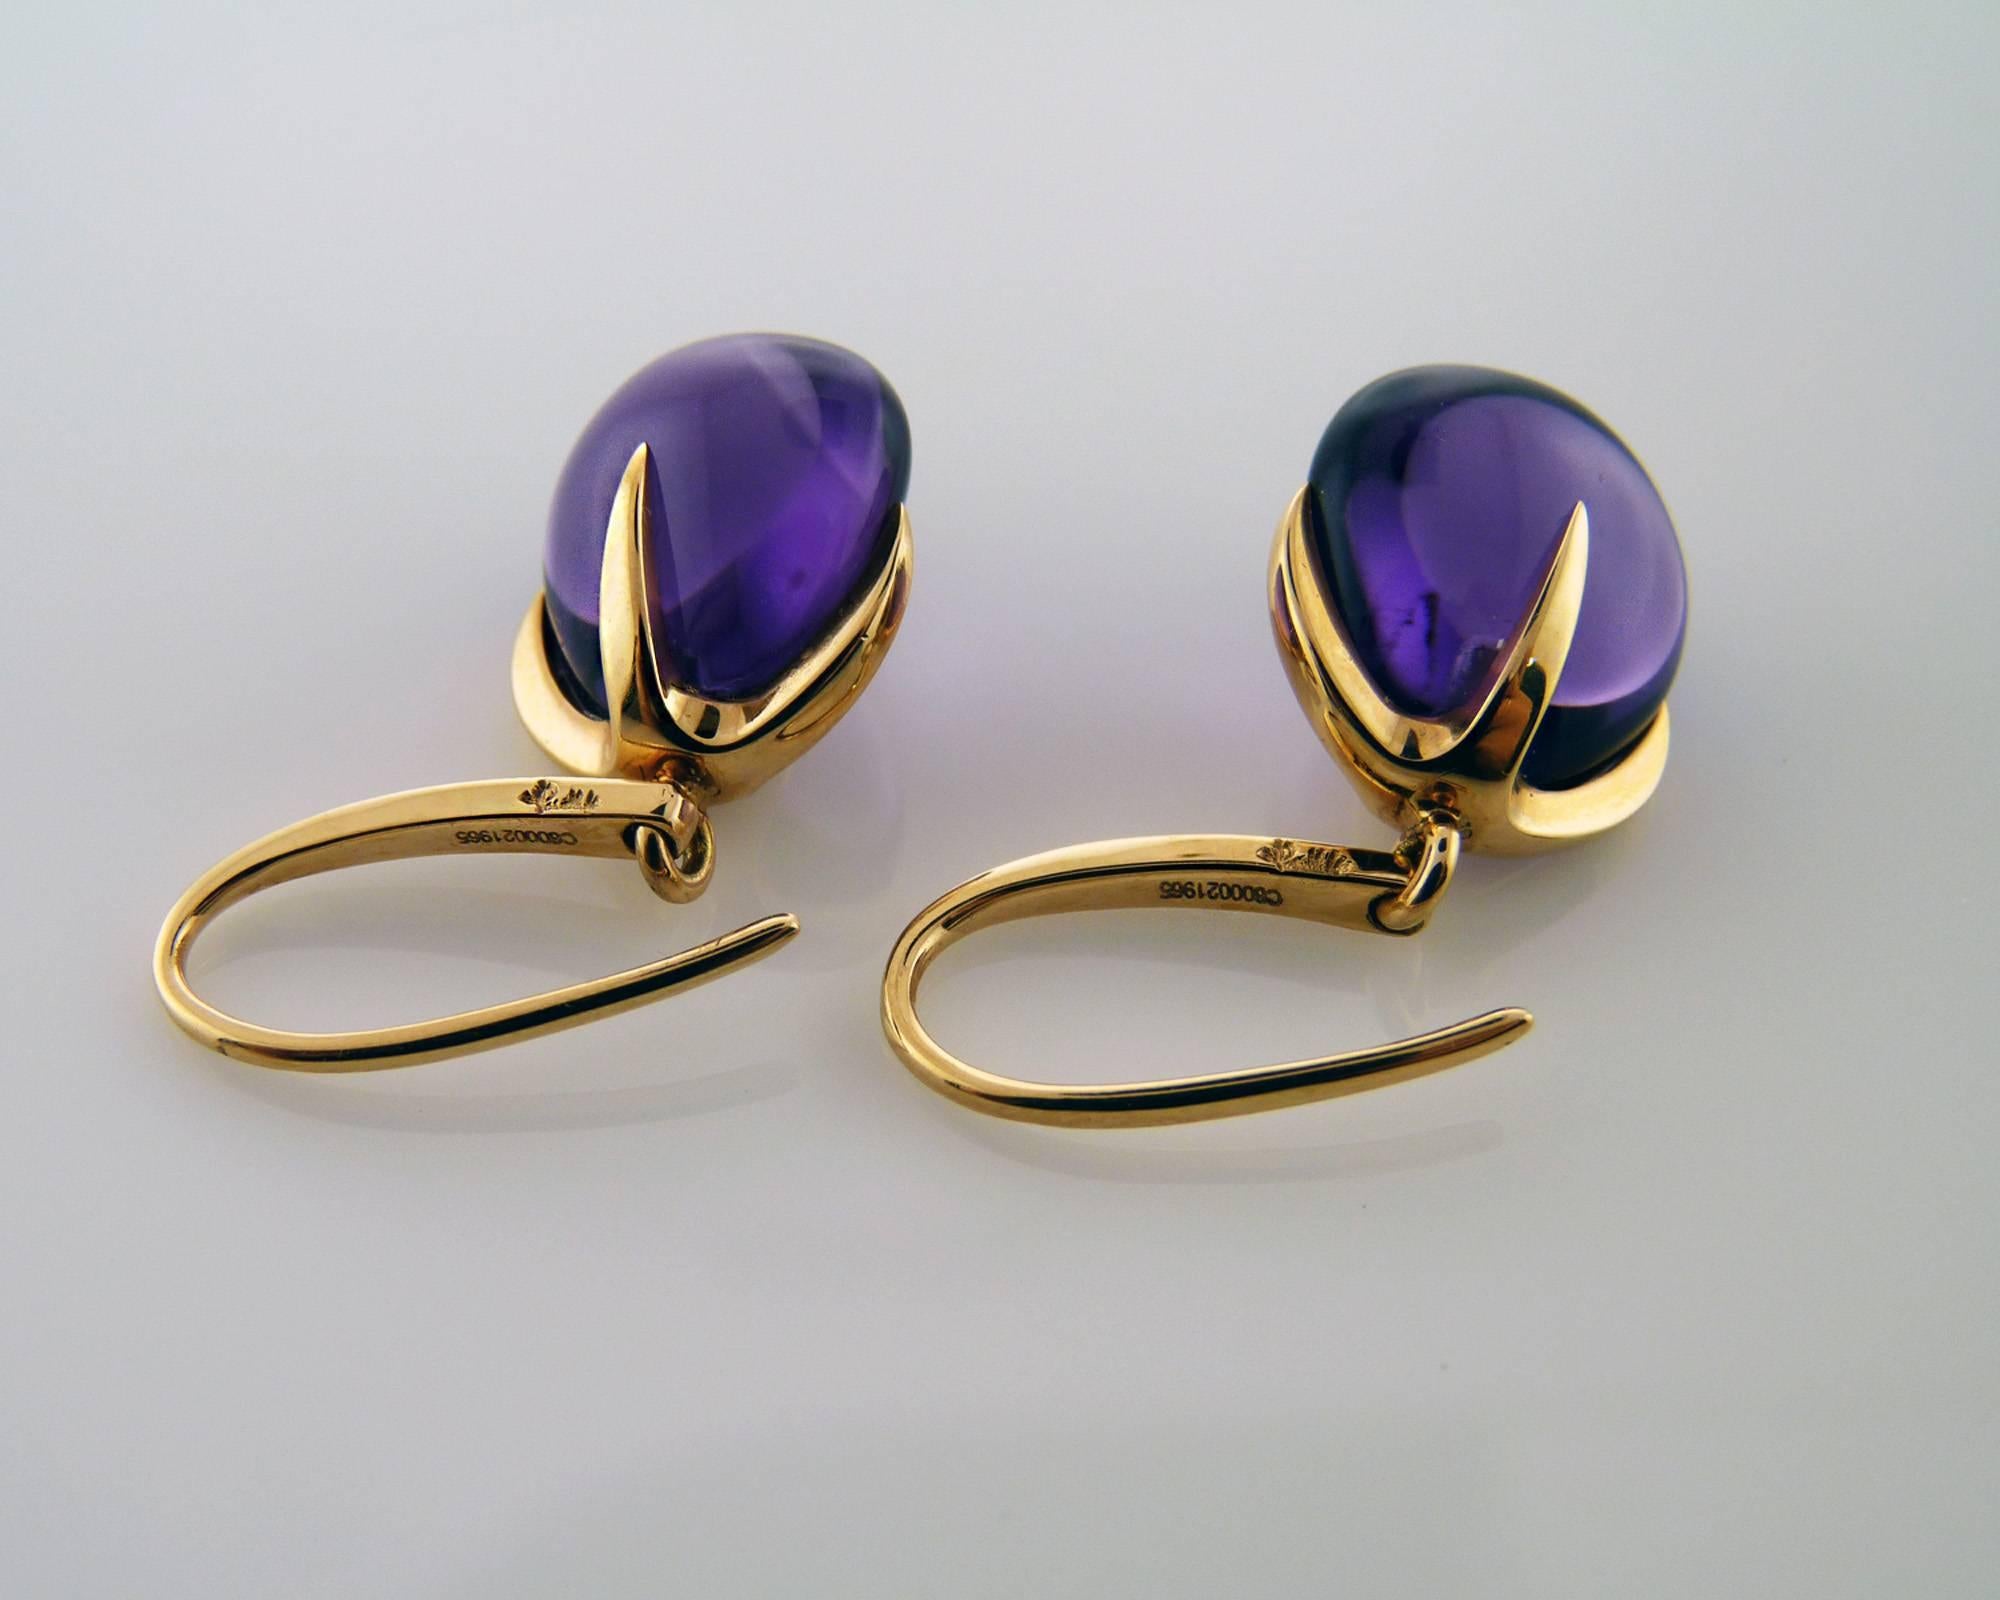 This authentic pair of earrings are by Pomellato, they are crafted from solid 18k rose gold with a polished finish featuring hook backs with a dangling fruit like shape amethyst. It is signed by the designer with the metal content.

Material: 18k